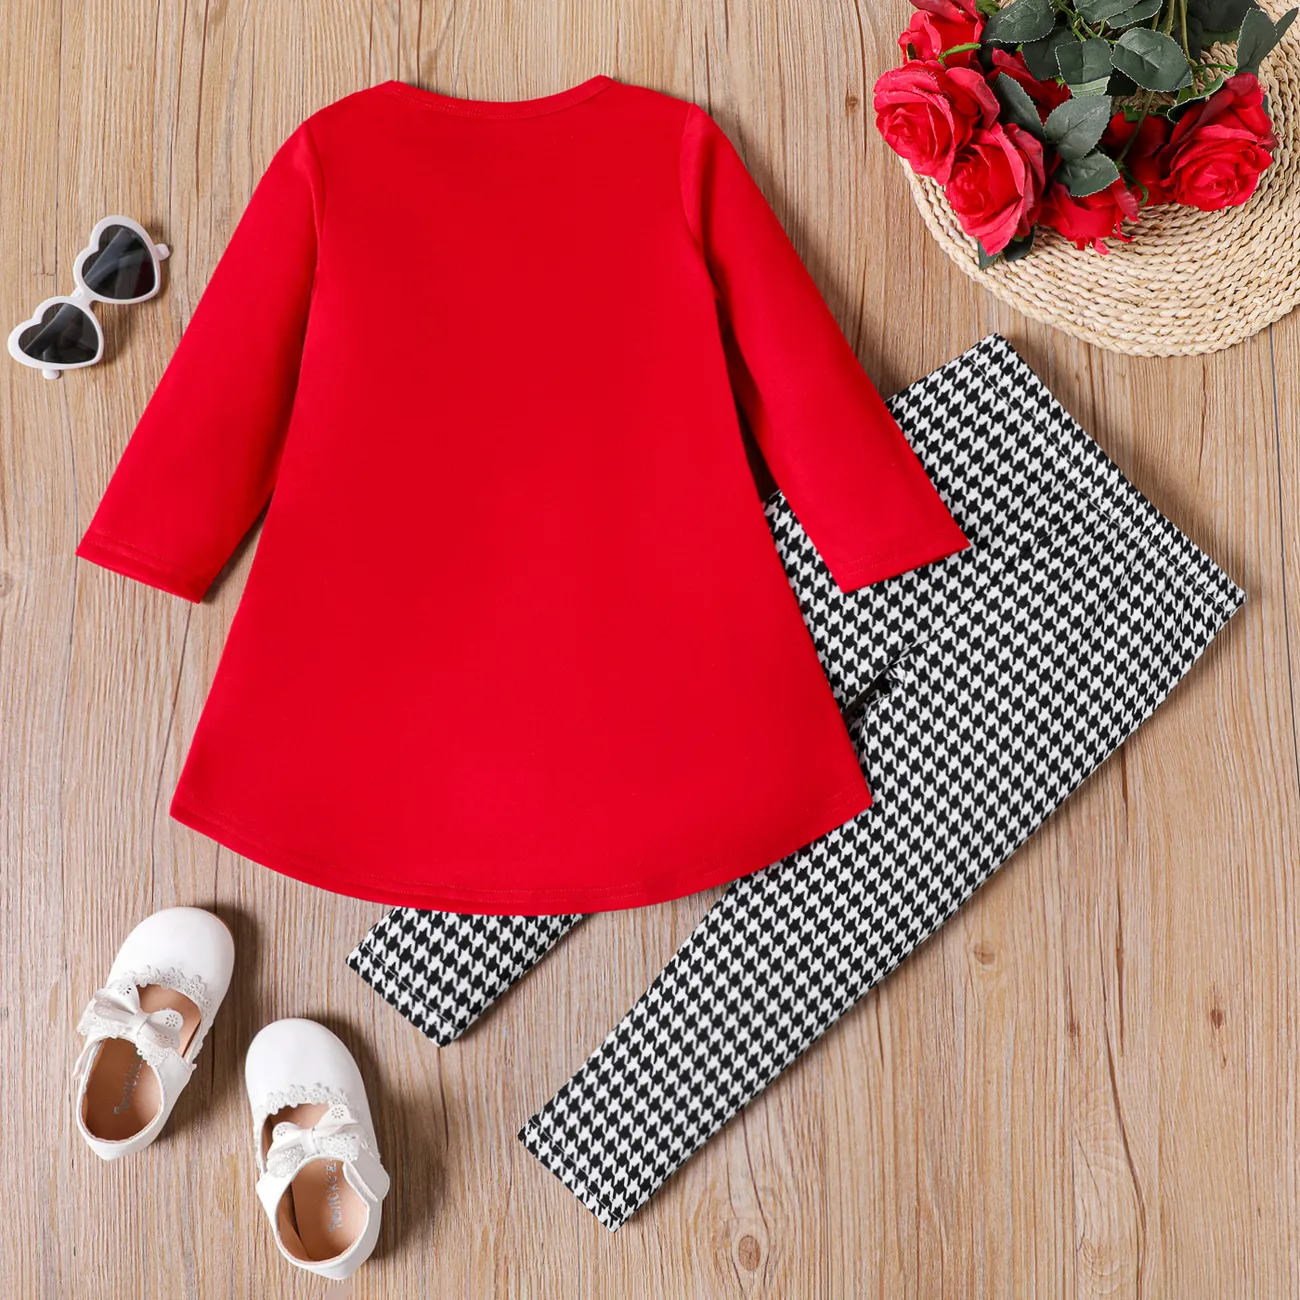 2pcs Toddler Girl Bowknot Print High Low Long-sleeve Tee and Houndstooth Leggings Set Red-2 big image 1